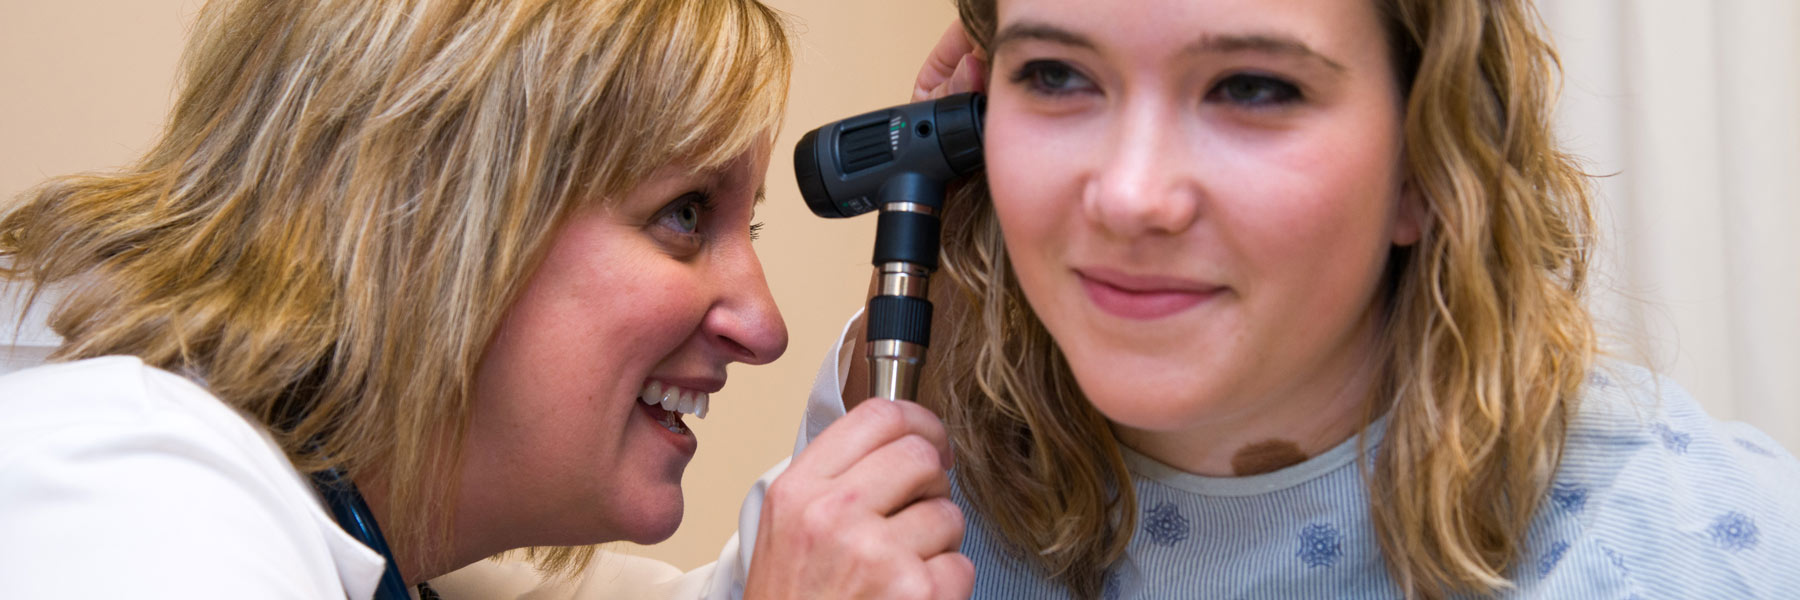 IU East Nursing student examining patient's ear with an otoscope.